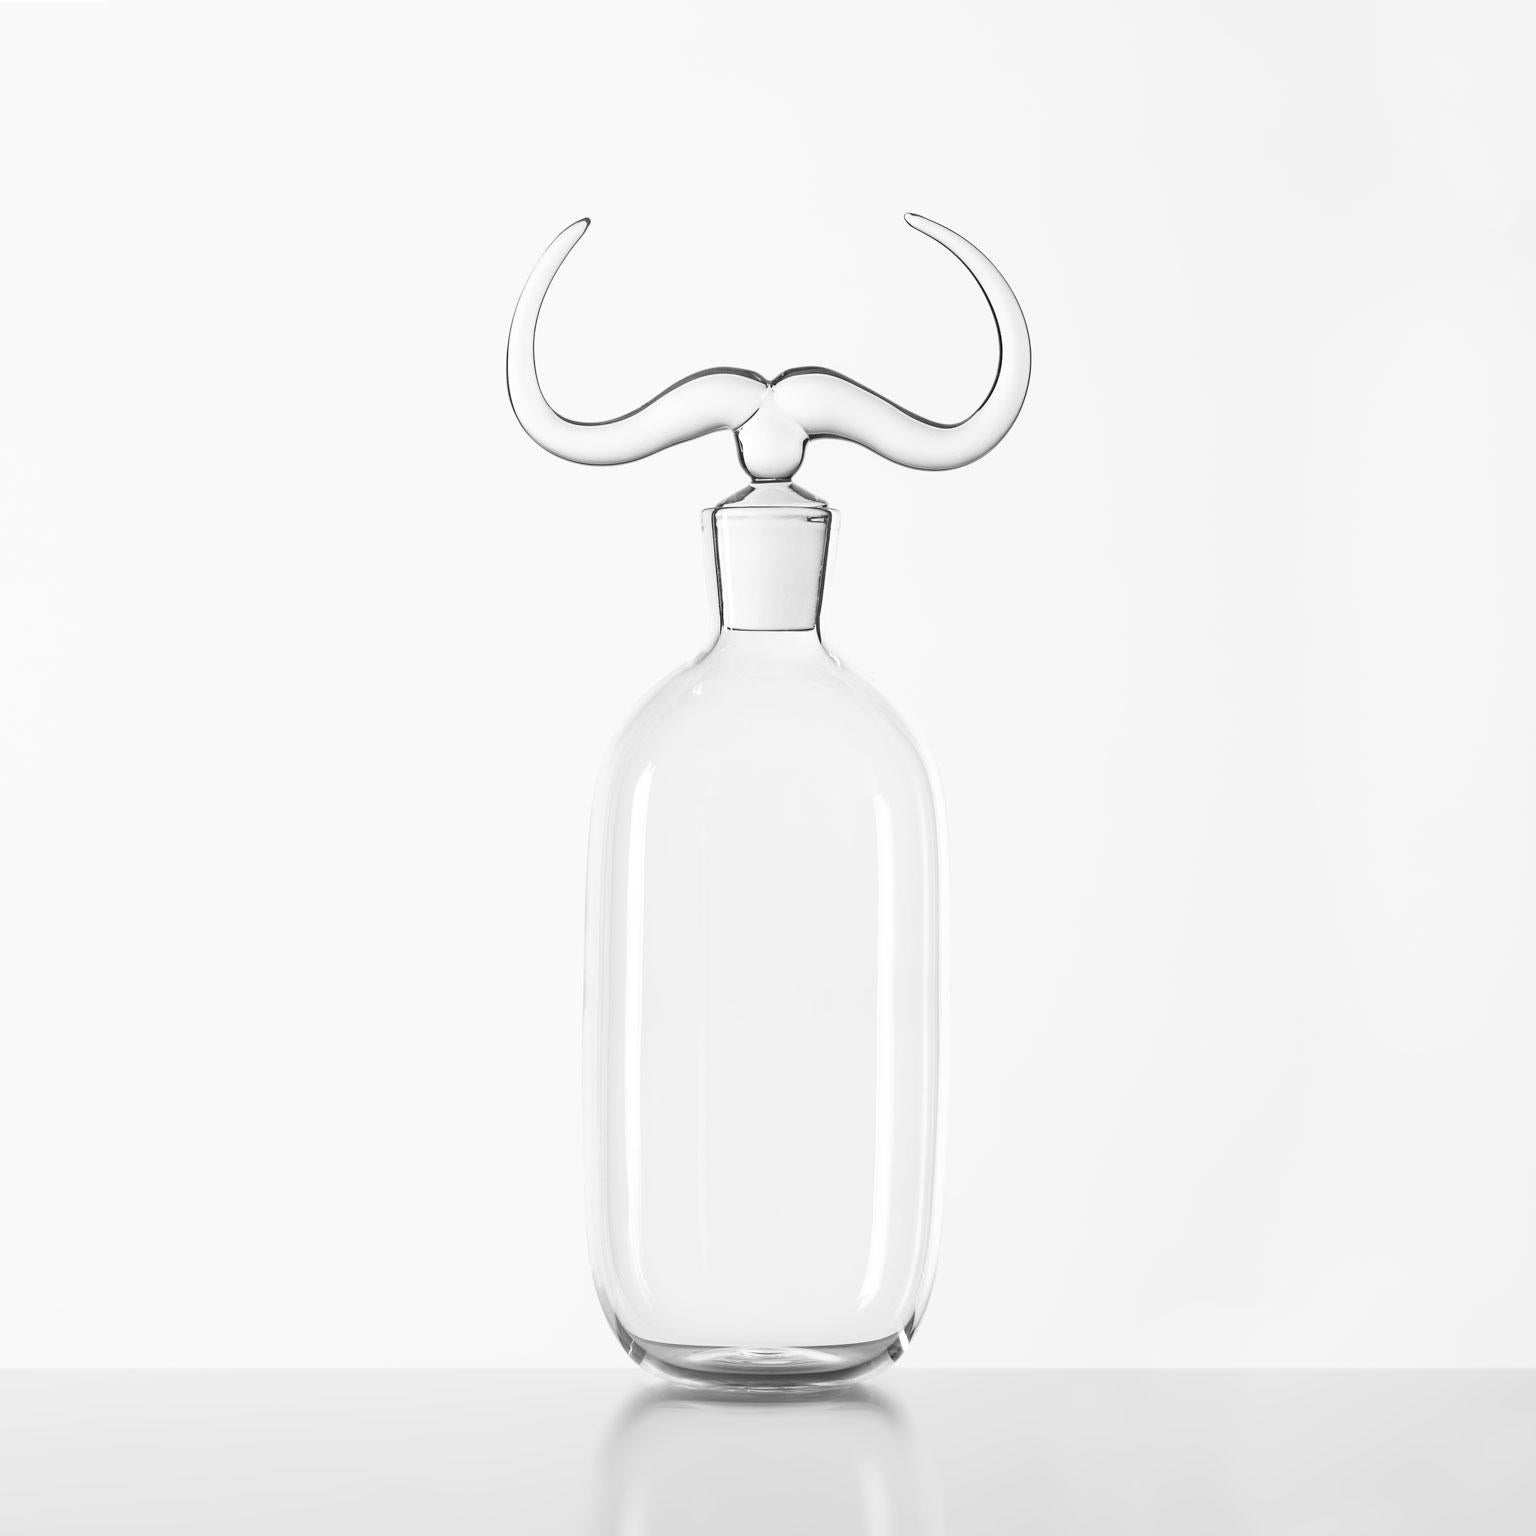 A Hand Blown Glass Bottle by Simone Crestani

Buffalo Bottle is one of the pieces from the Africa Trophy Bottles.

